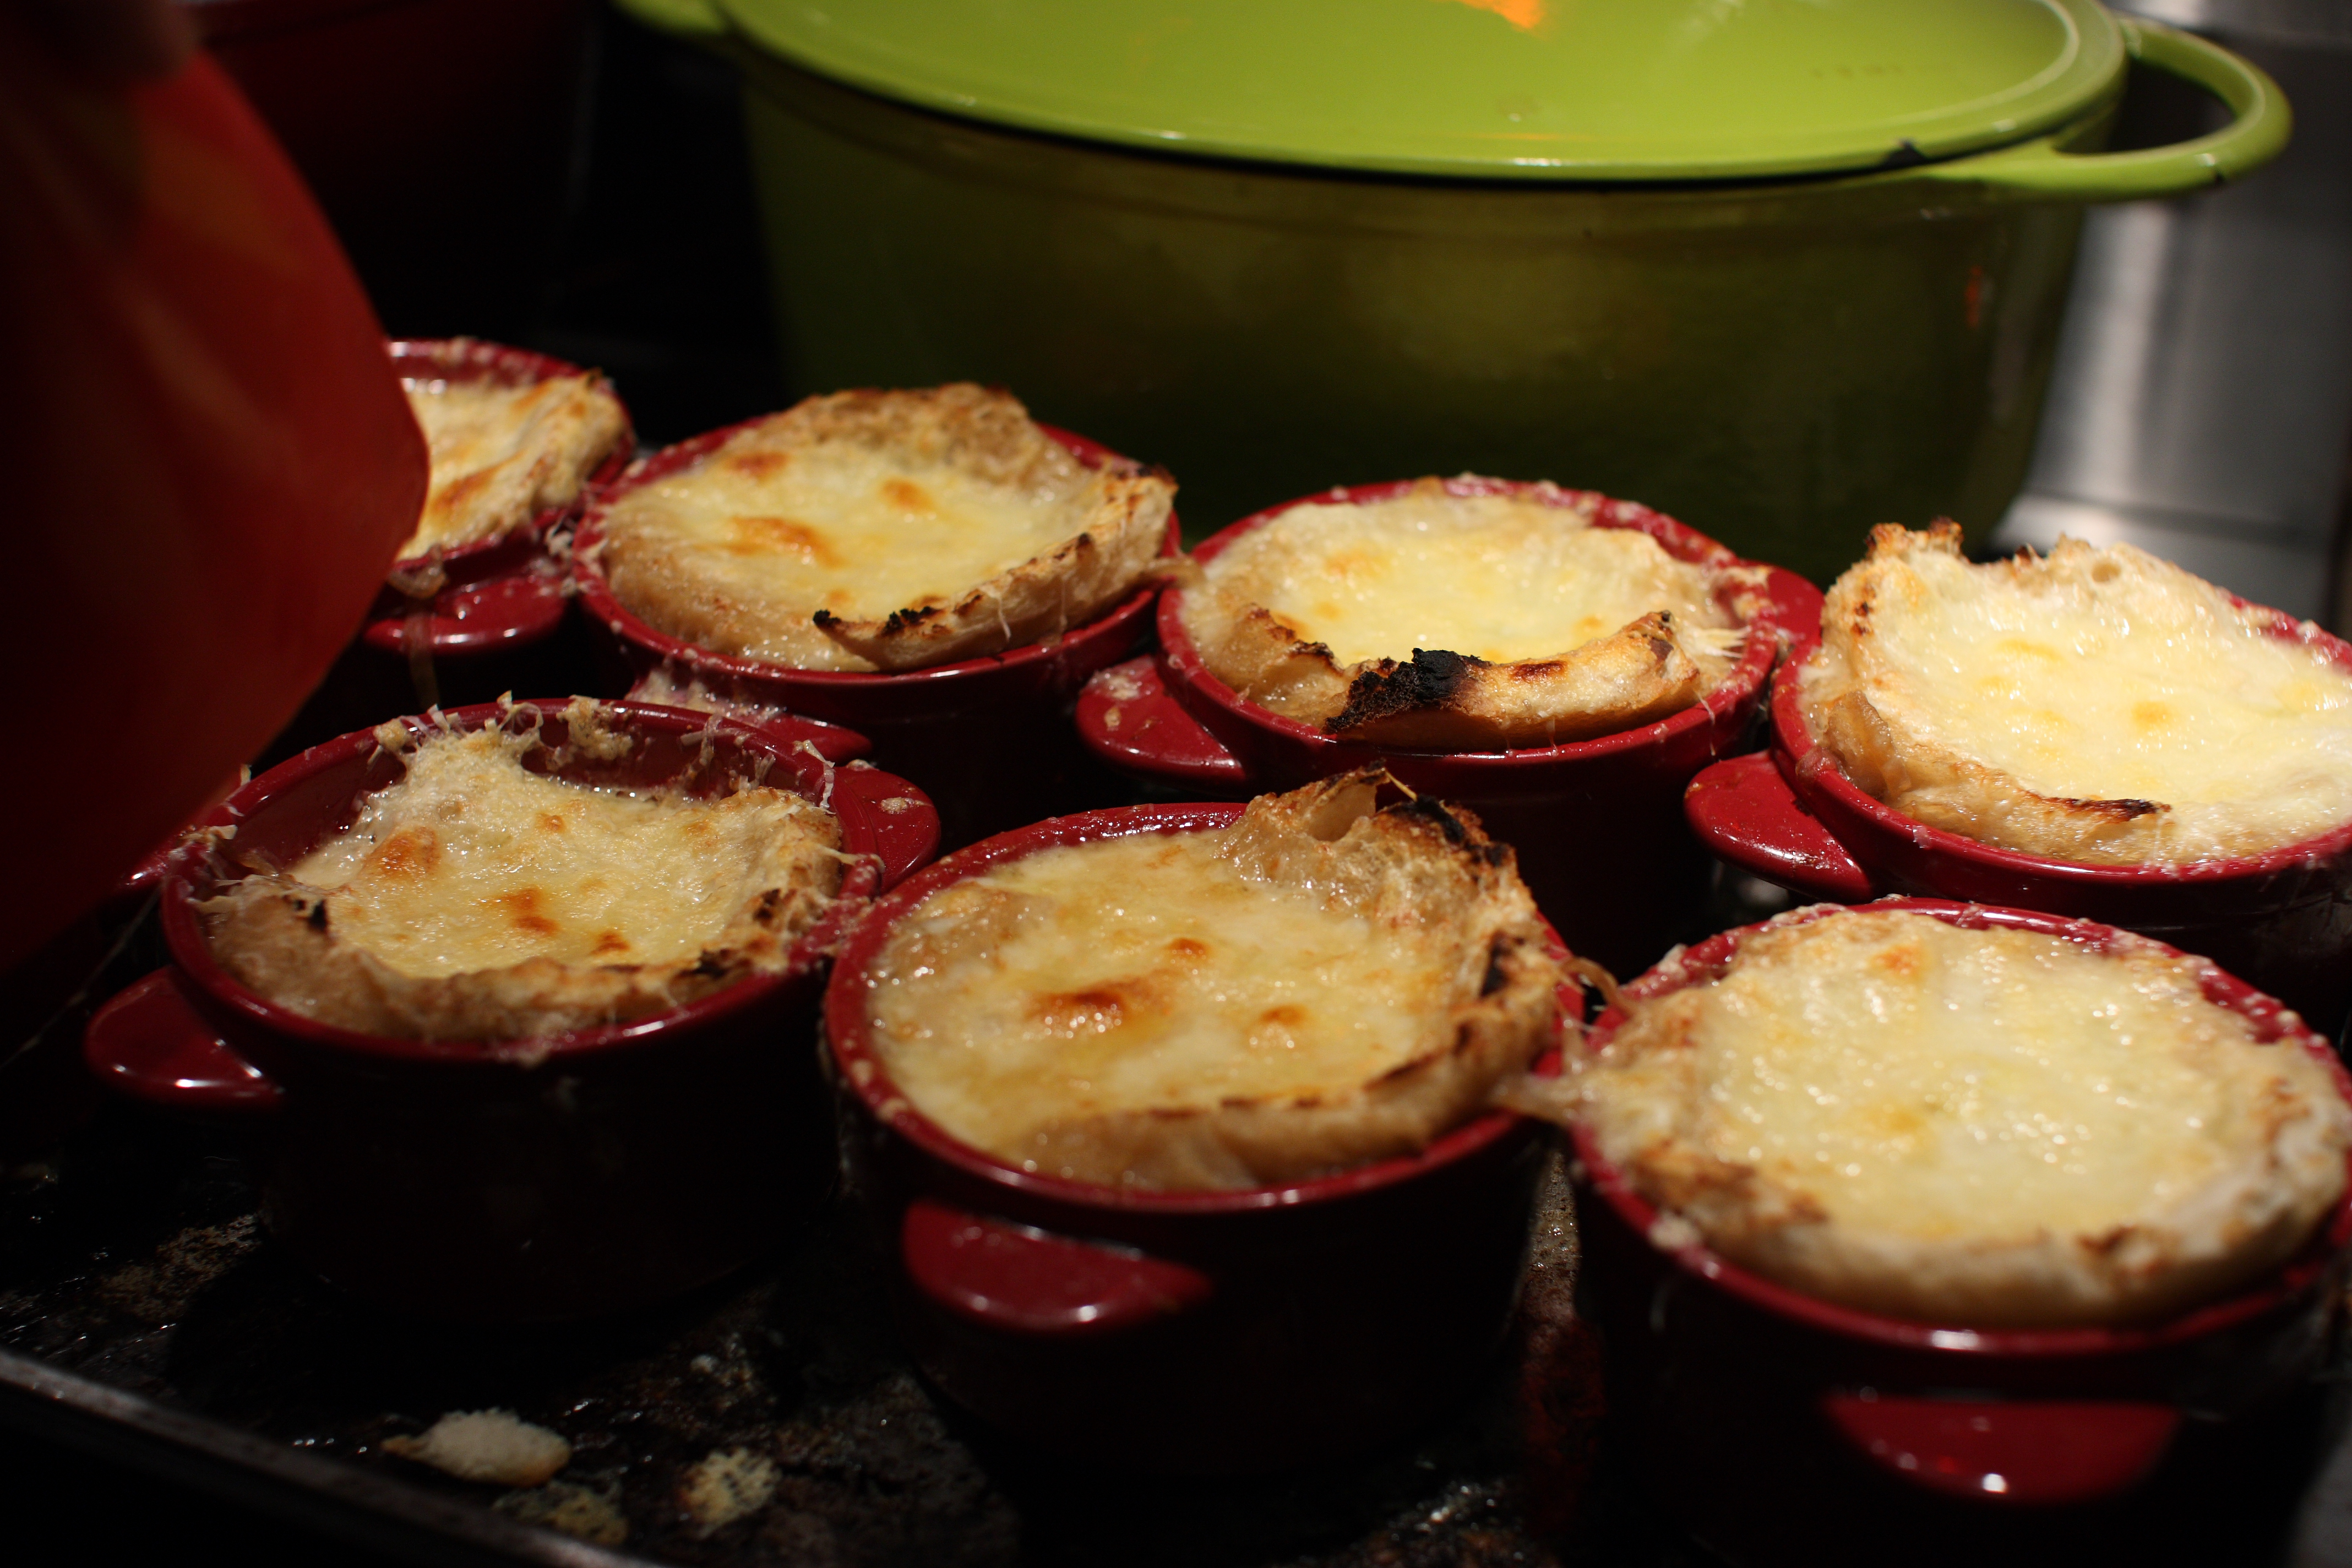 Course 2: french onion soup